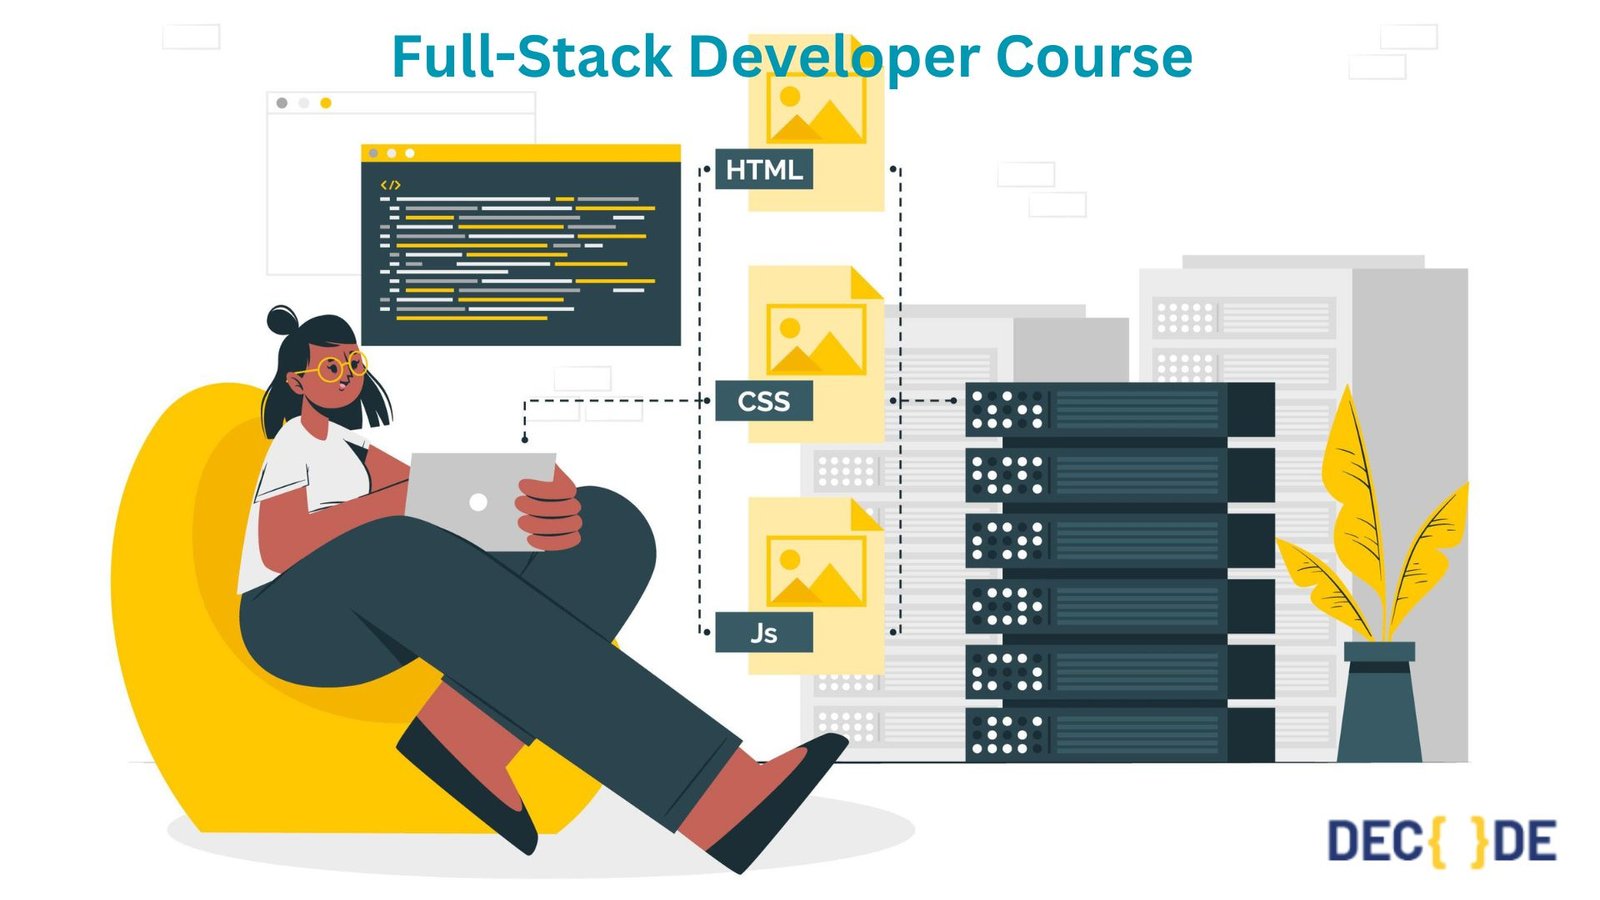 5 Decent Capabilities That Make Full-Stack Developer Course Successful